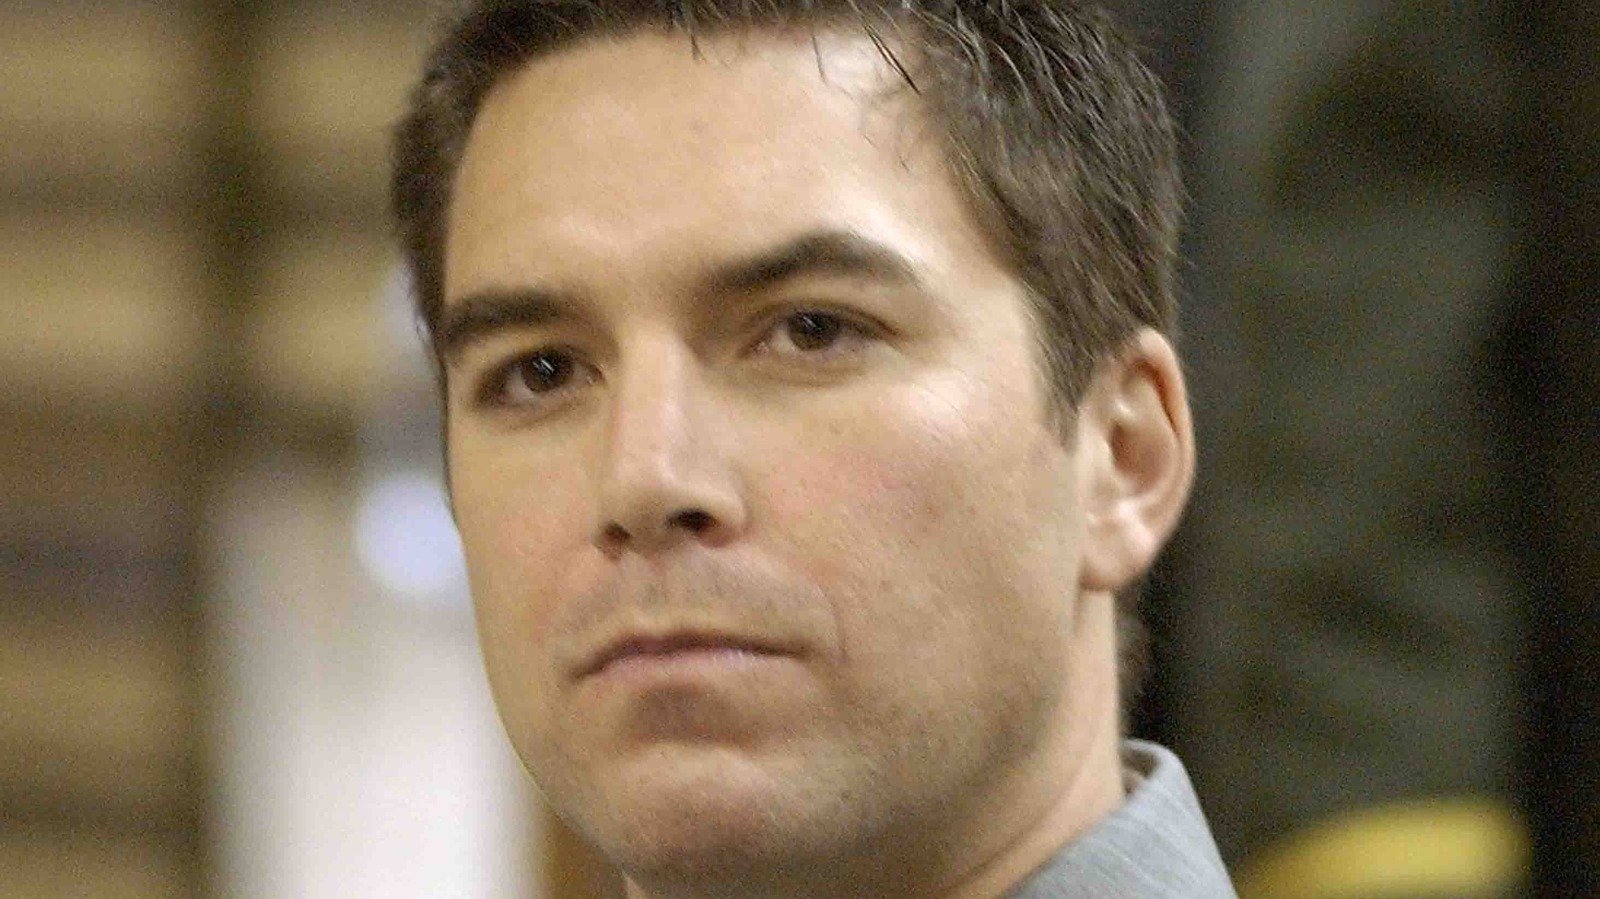 This Is What Scott Peterson's Life In Prison Is Really Like - Grunge